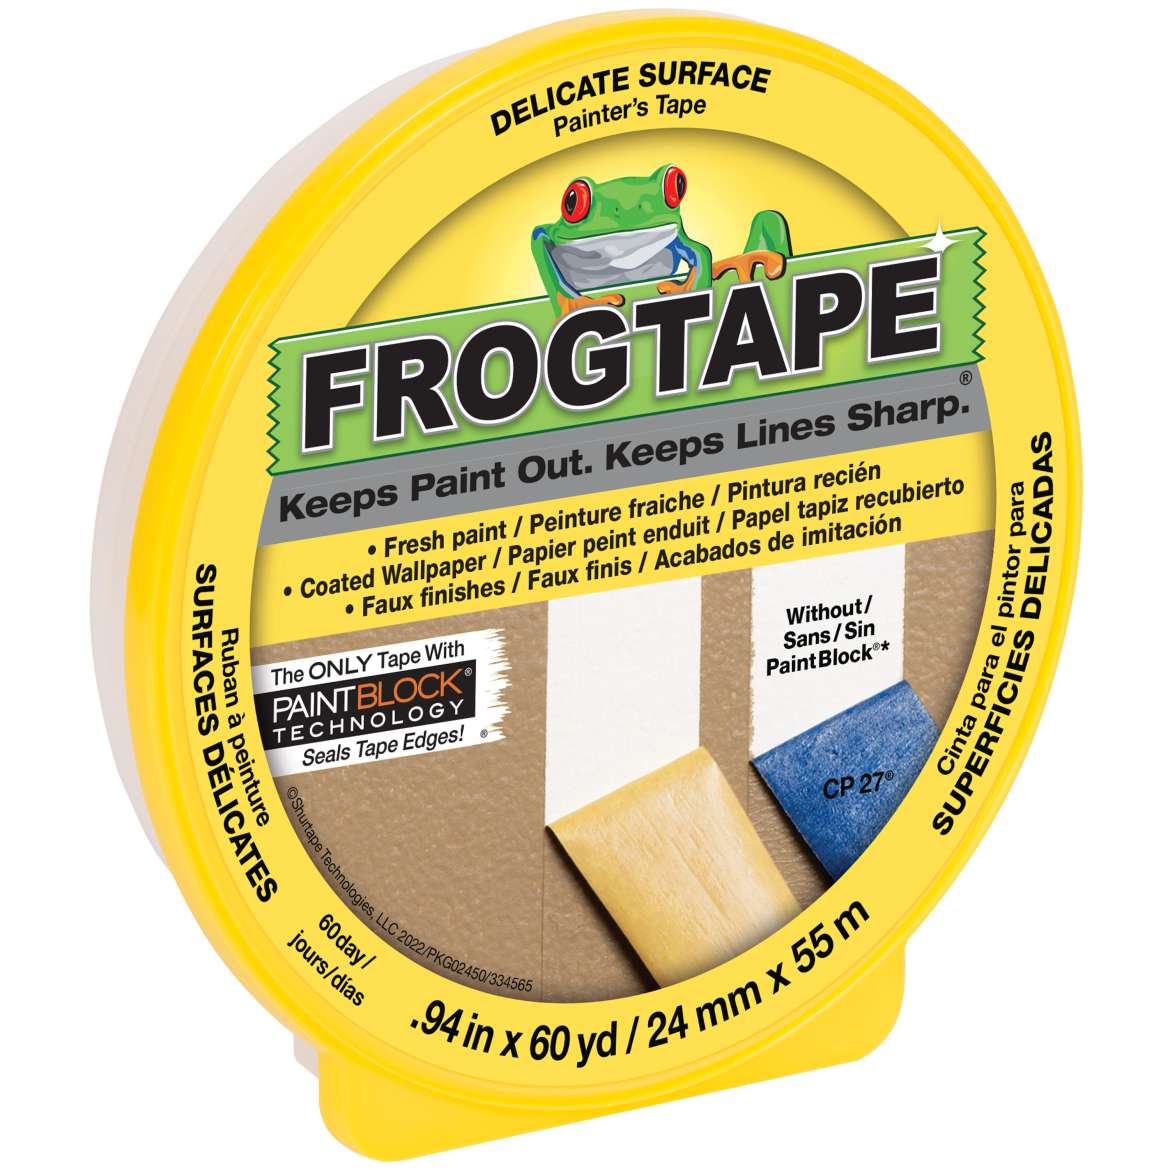 Shurtech Tape Roll Frogtape - Painter's Tape - 24mm x 50m Roll - Delicate Surface - Item #332816